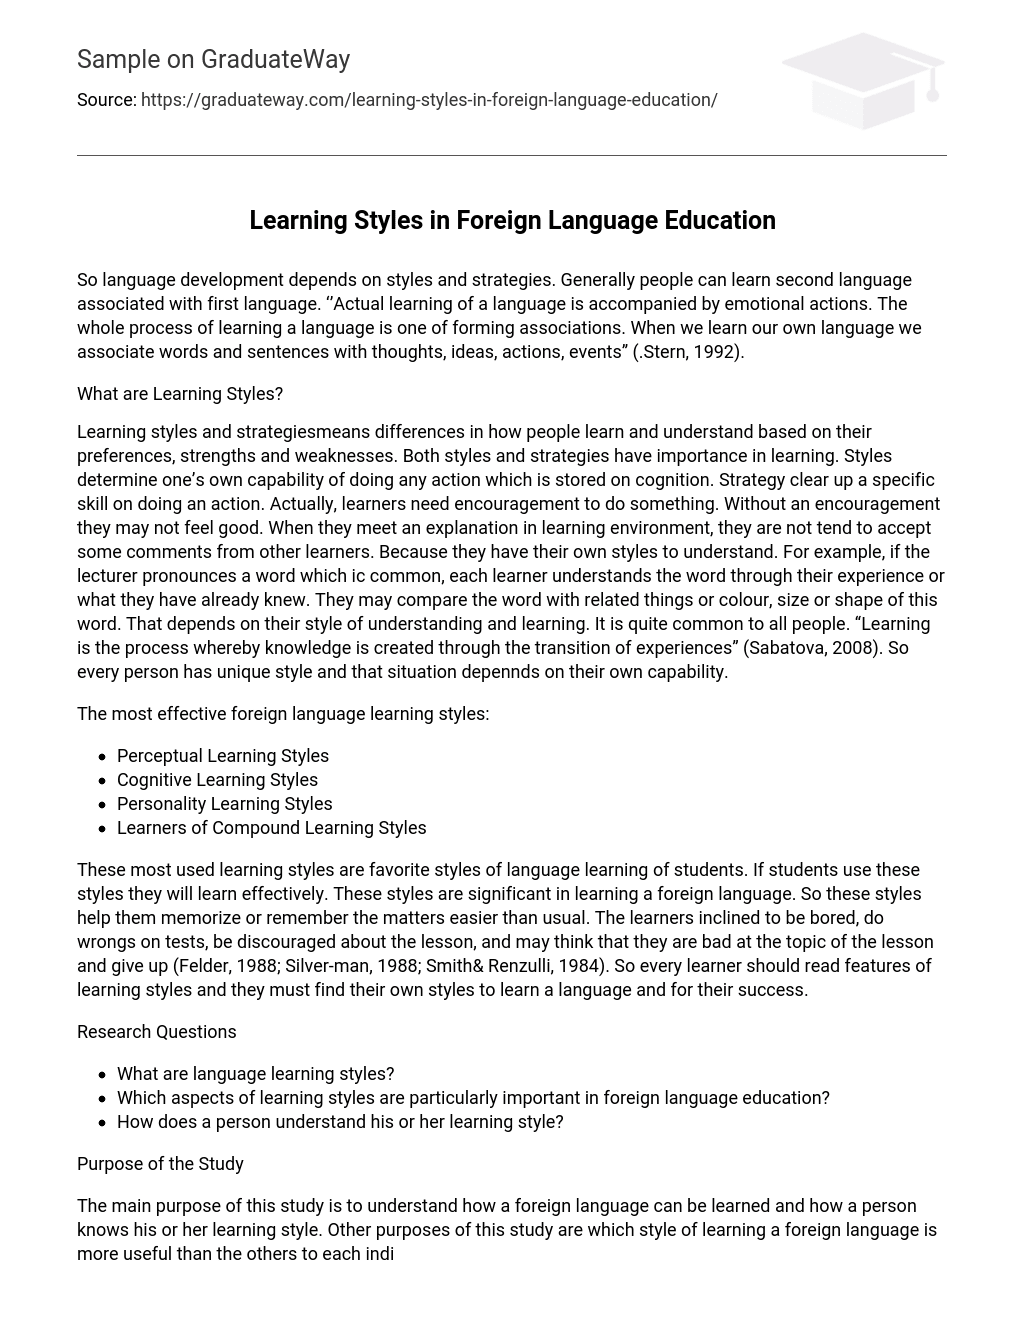 Learning Styles in Foreign Language Education